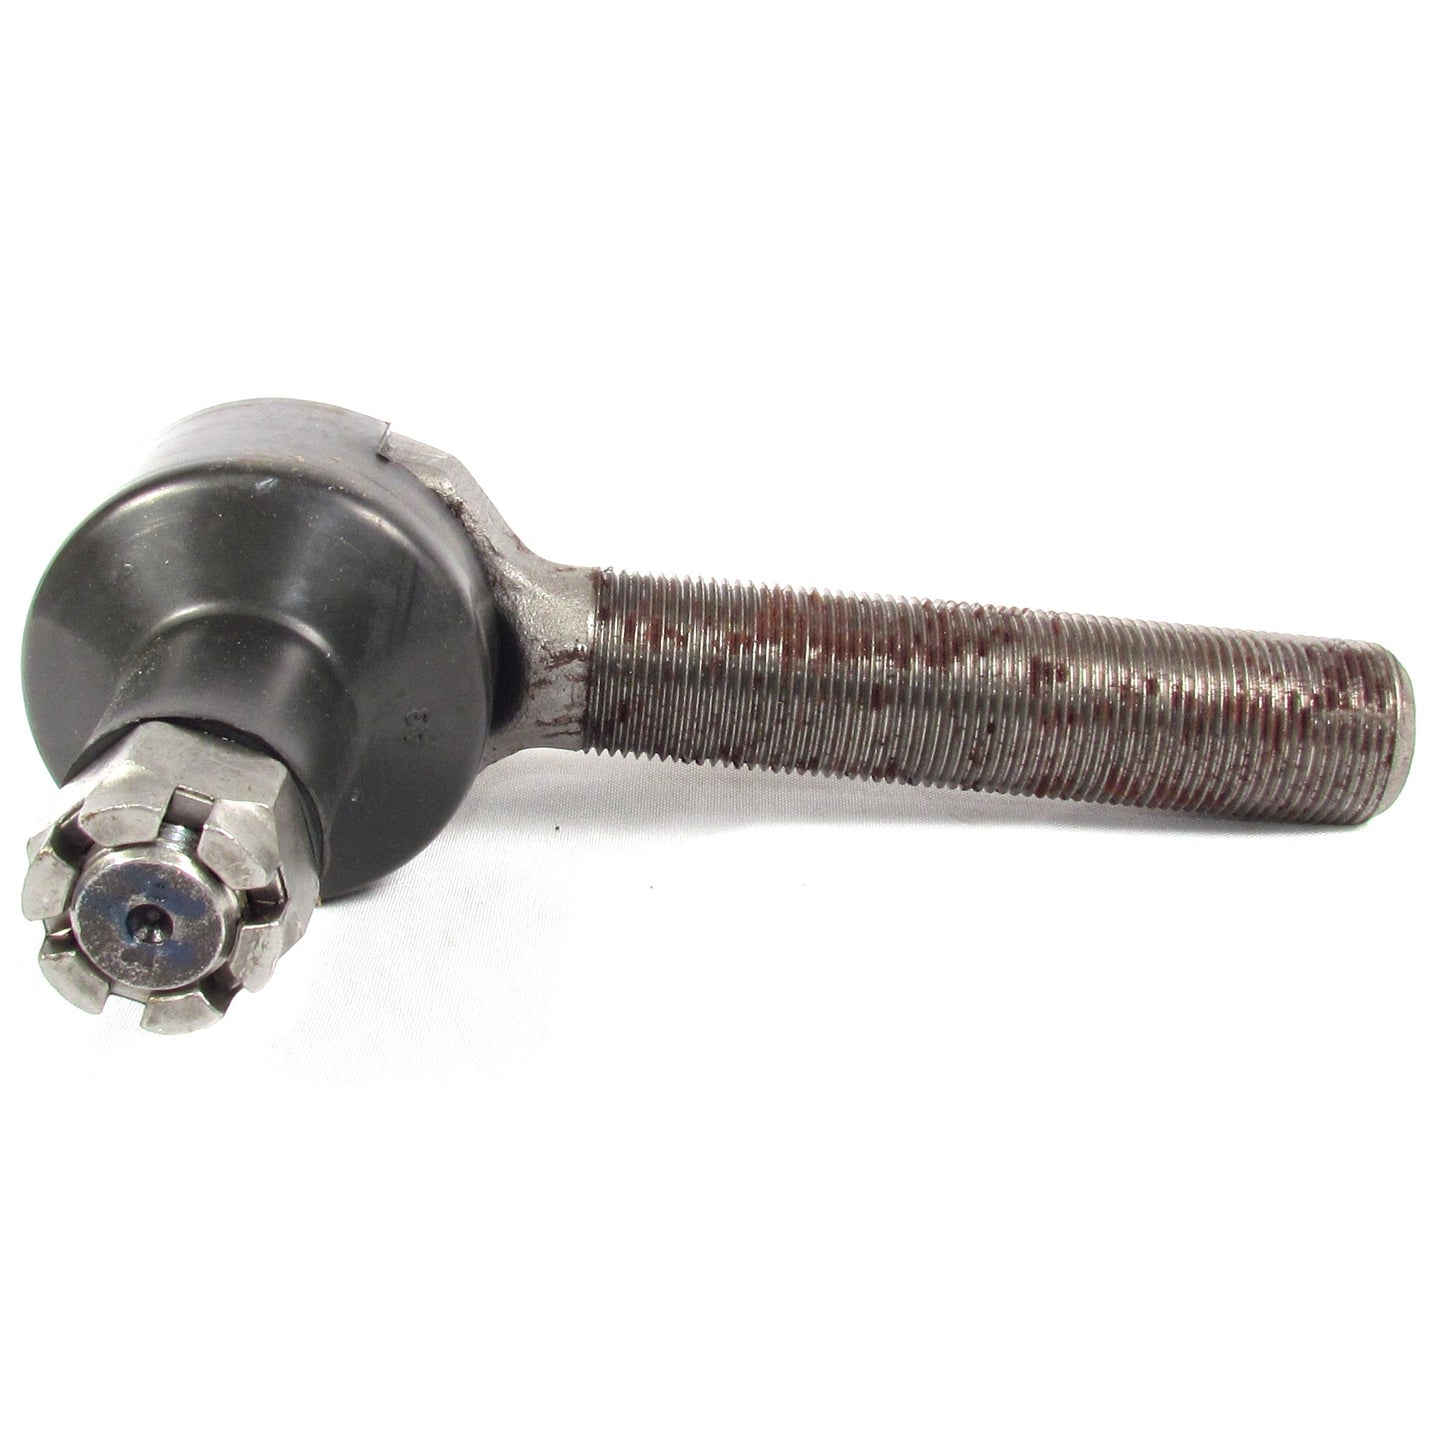 Fortpro Tie Rod End Compatible with Mack Replaces 10QH248P5-Right Side/10QH248P6-Left Side | F265864-F265865